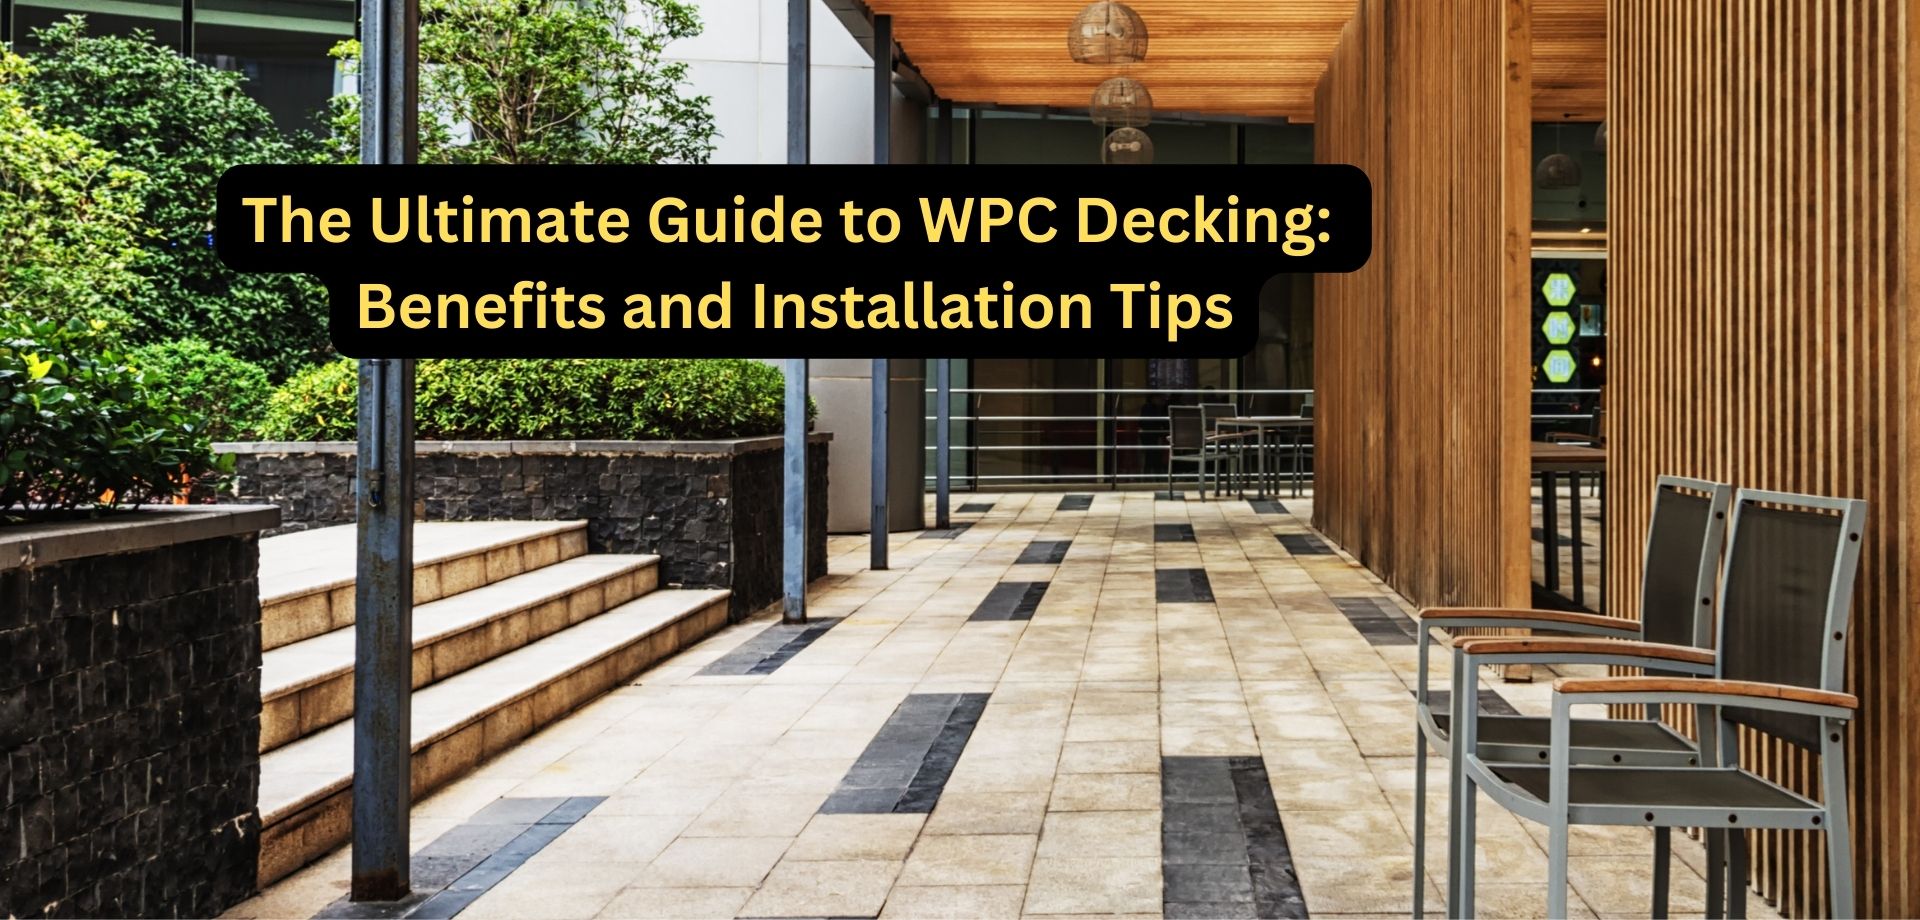 The Ultimate Guide to WPC Decking: Benefits and Installation Tips